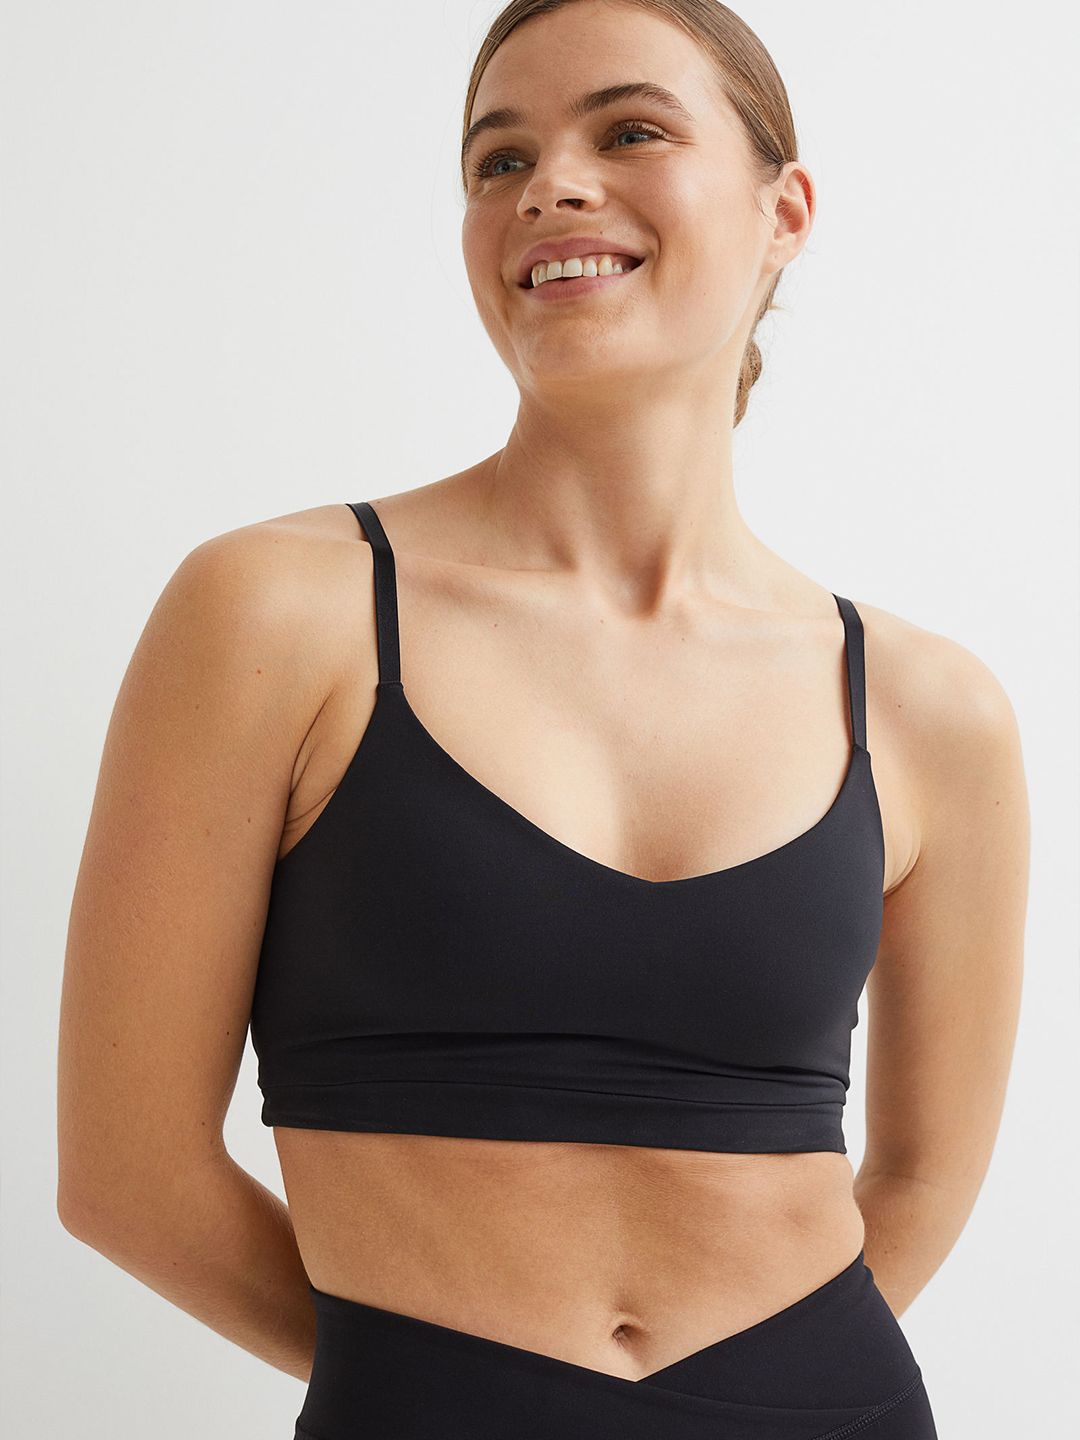 Buy Zelocity Sports Bra With Removable Padding - Jet Black at Rs